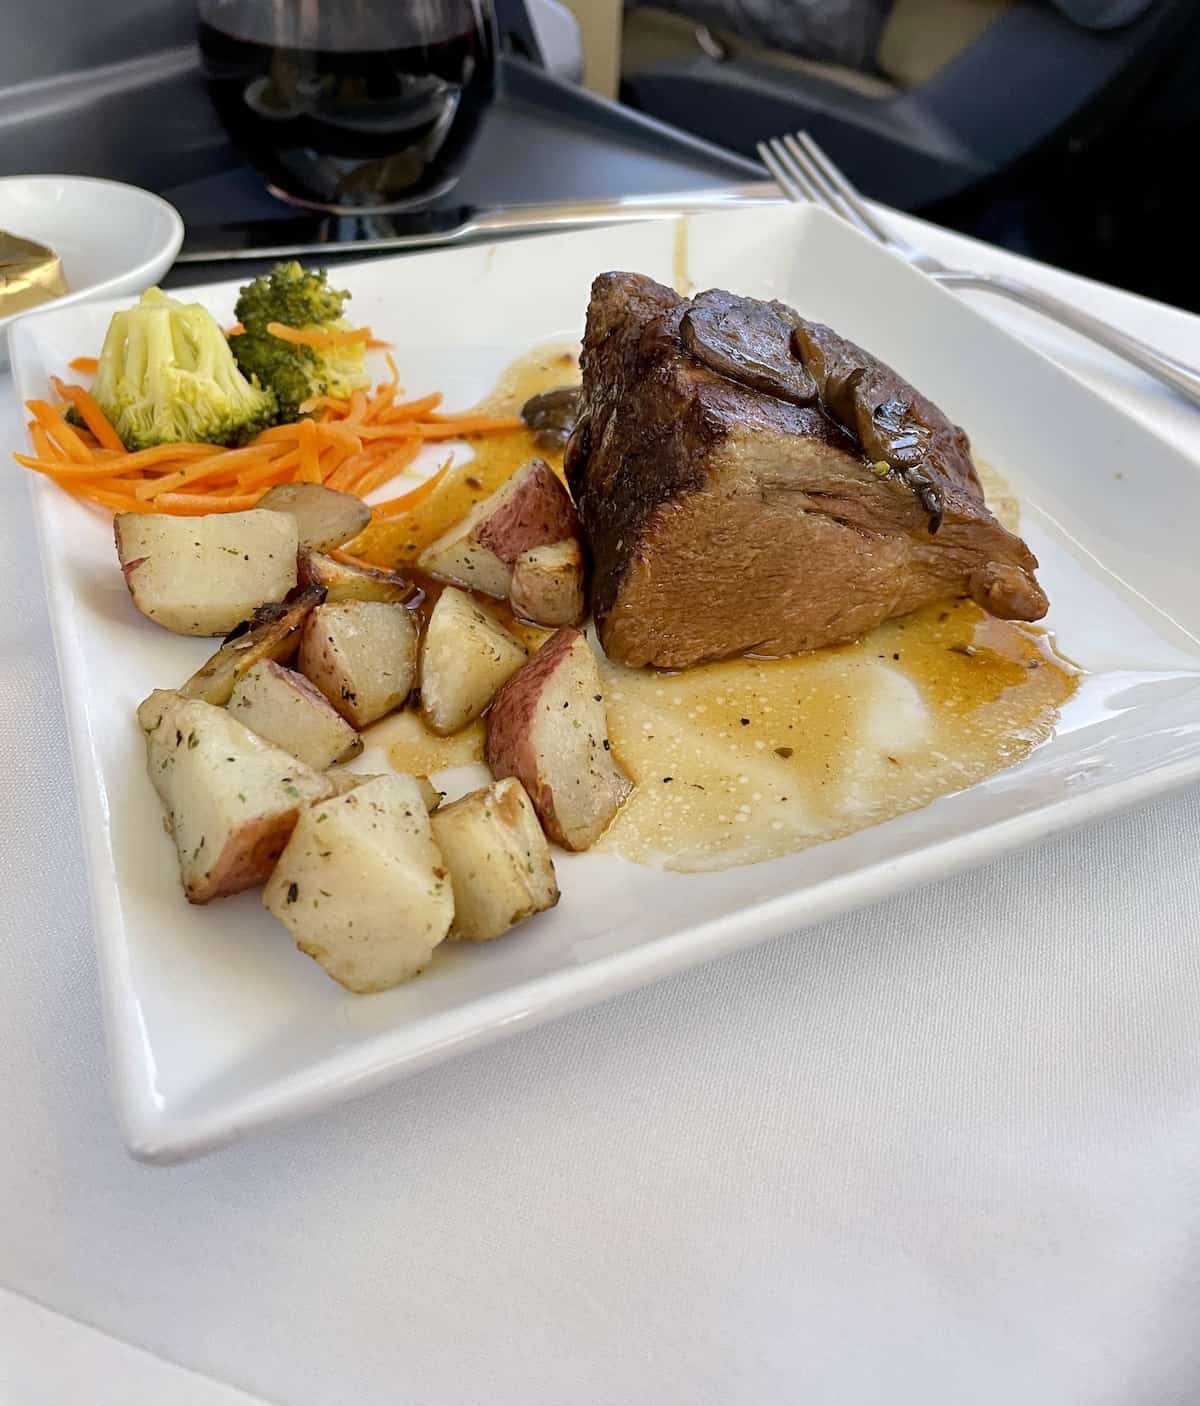 Short ribs with potatoes and vegetables on a white plate on a white napkin.